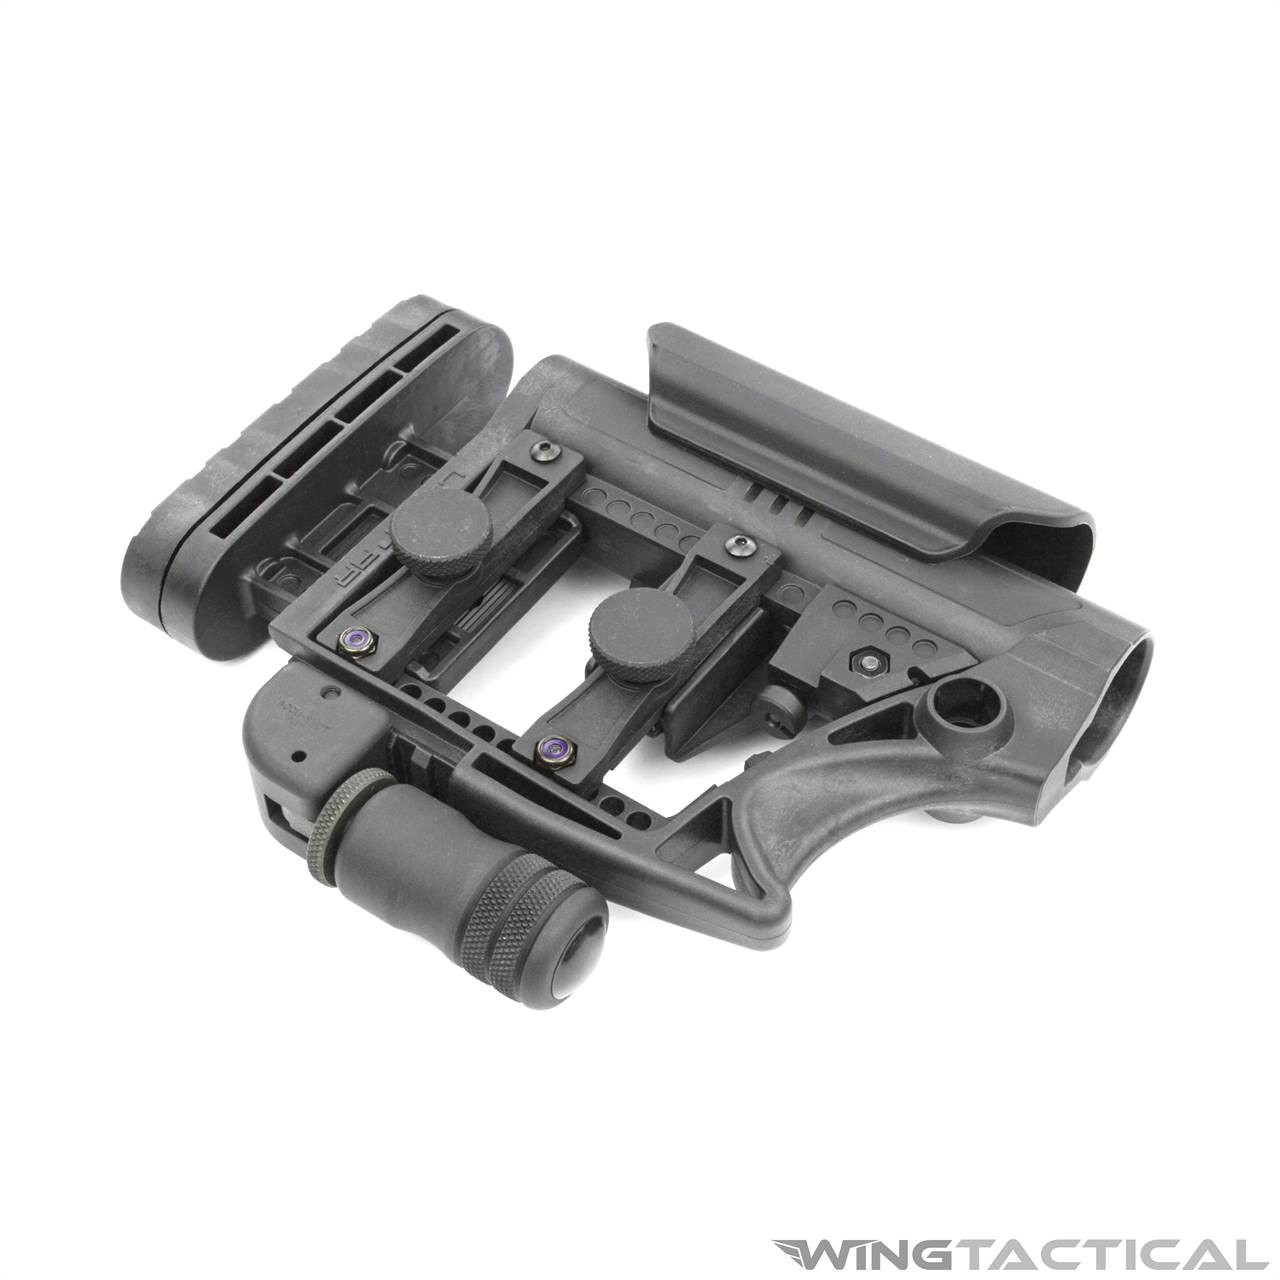 LUTH AR MBA Carbine Stock   Wing Tactical